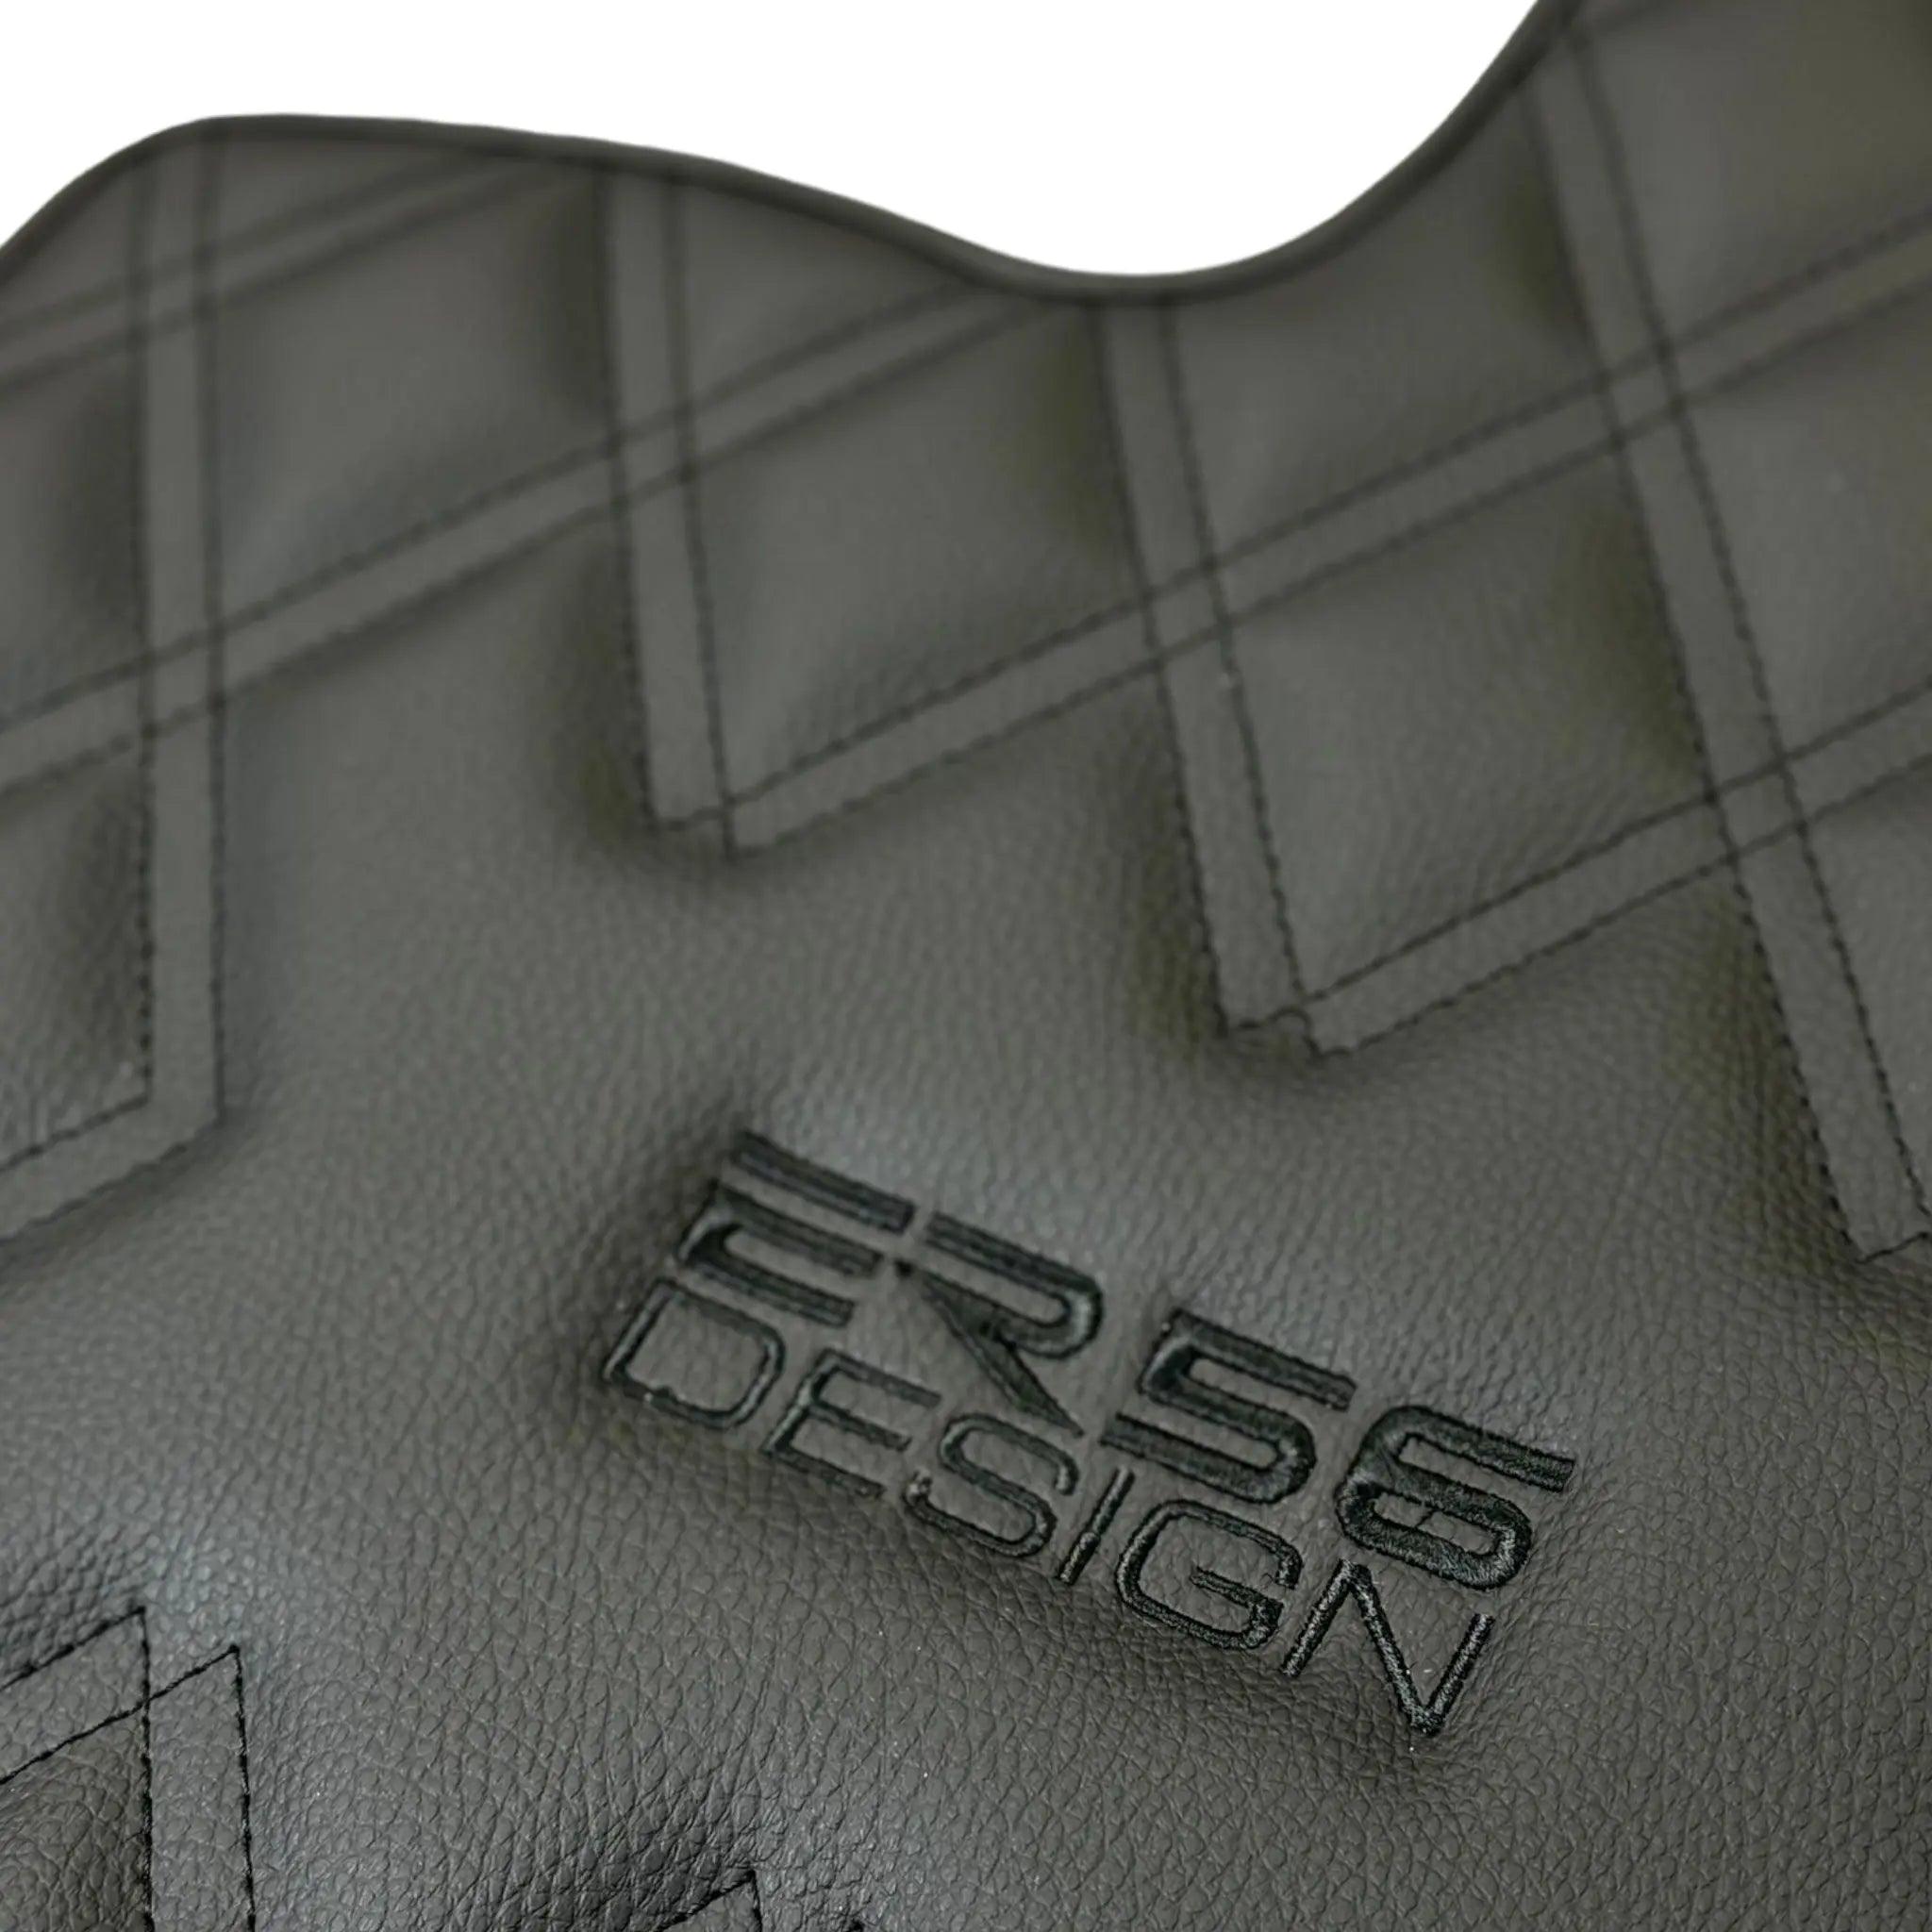 Black Floor Mats for Bentley Continental GT (2003–2011) with Leather | ER56 Design